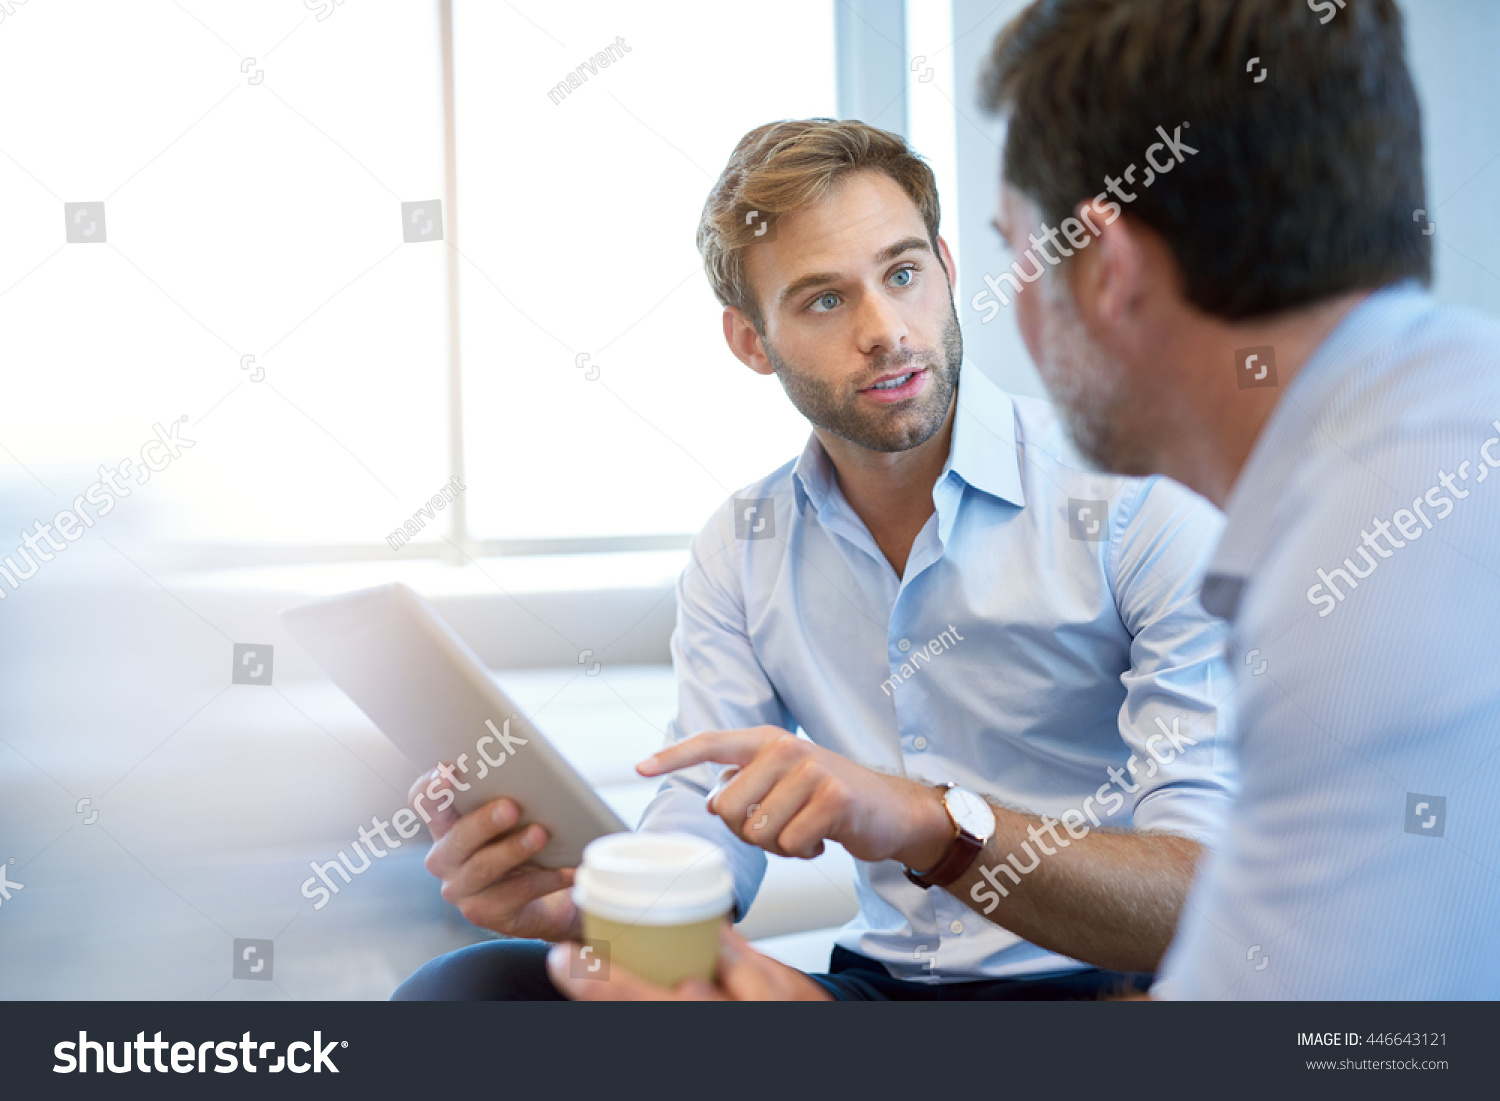 Handsome young business entrepreneur holding a digital tablet while talking about ideas with his mature corporate manager #446643121